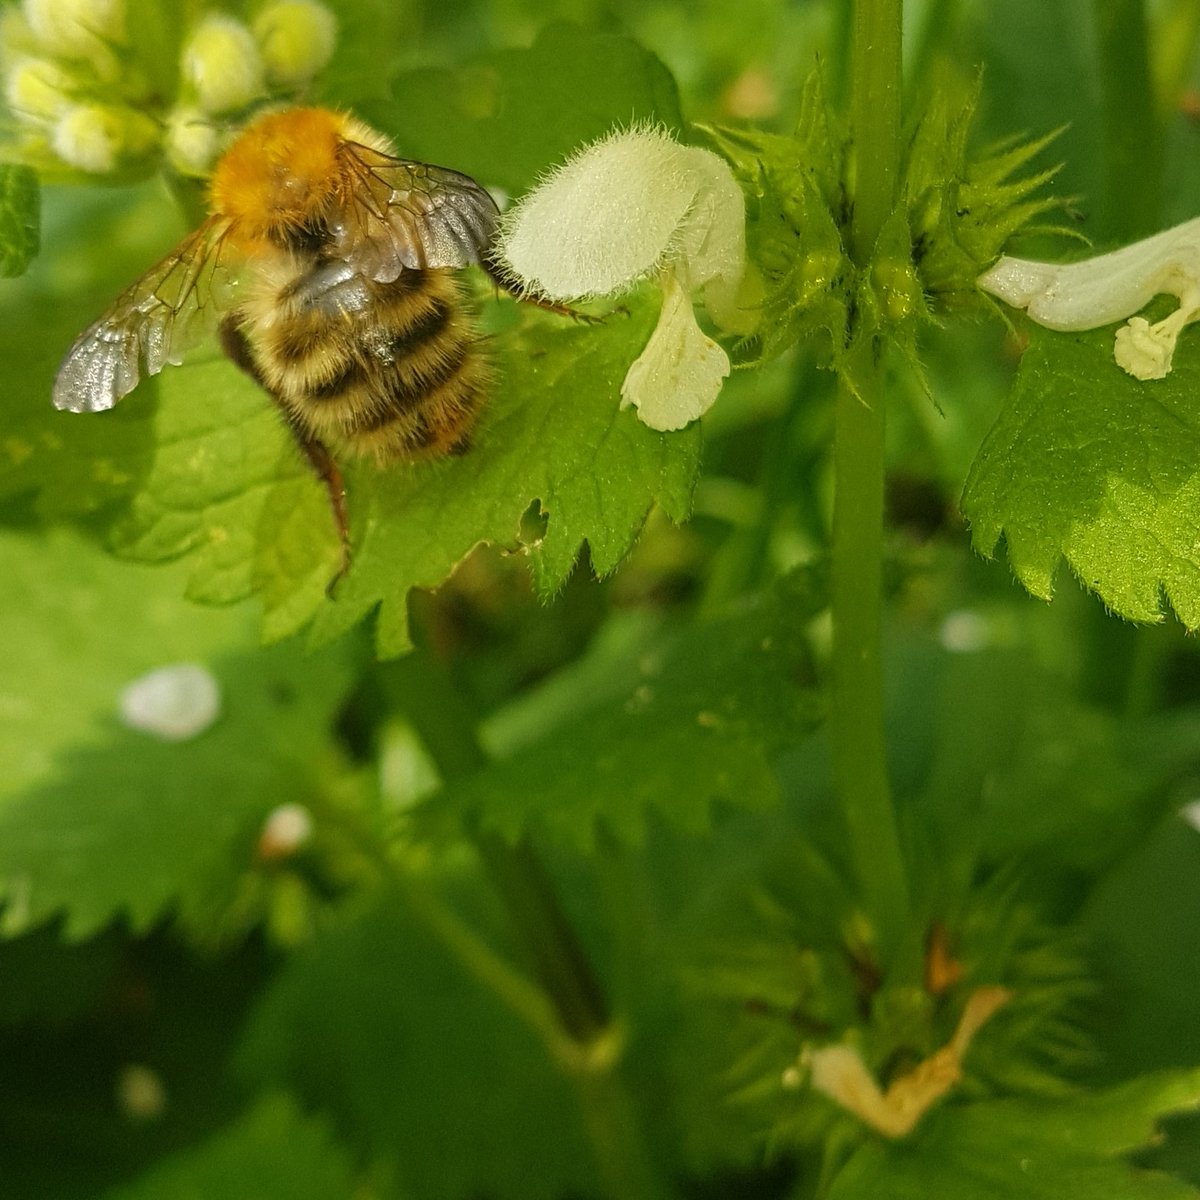 I am useless at bee ID. It's embarrassing. What is this one please? A Common Carder queen? Couldn't get the face on camera. @Buzz_dont_tweet @The_Buzz_Club @BumblebeeTrust @ray_rambling @Ed_P_Wildlife